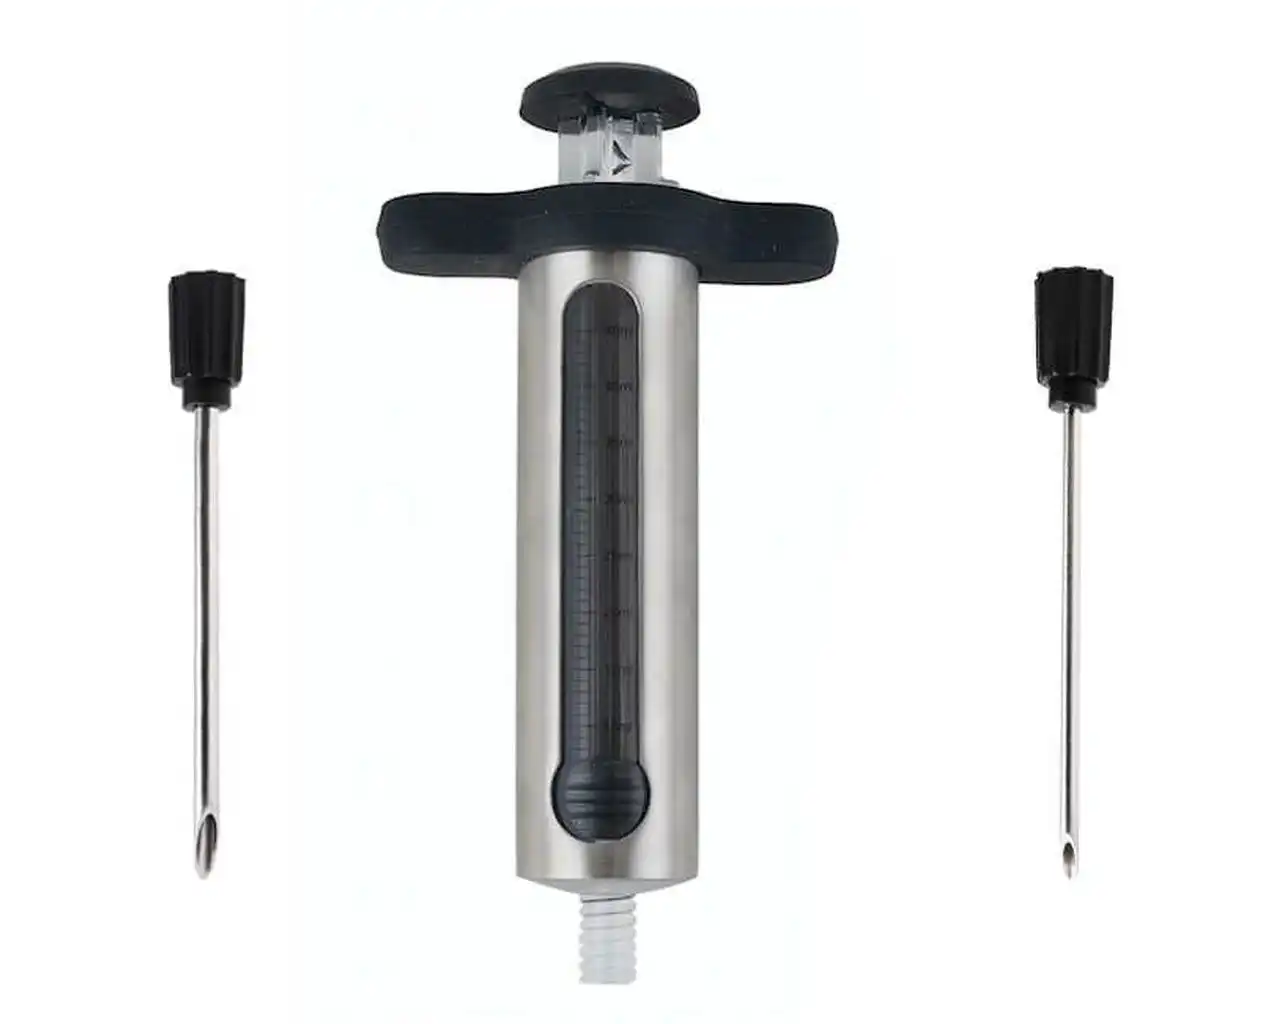 BBQ Dragon Stainless Steel Marinade Injector in the Marinade